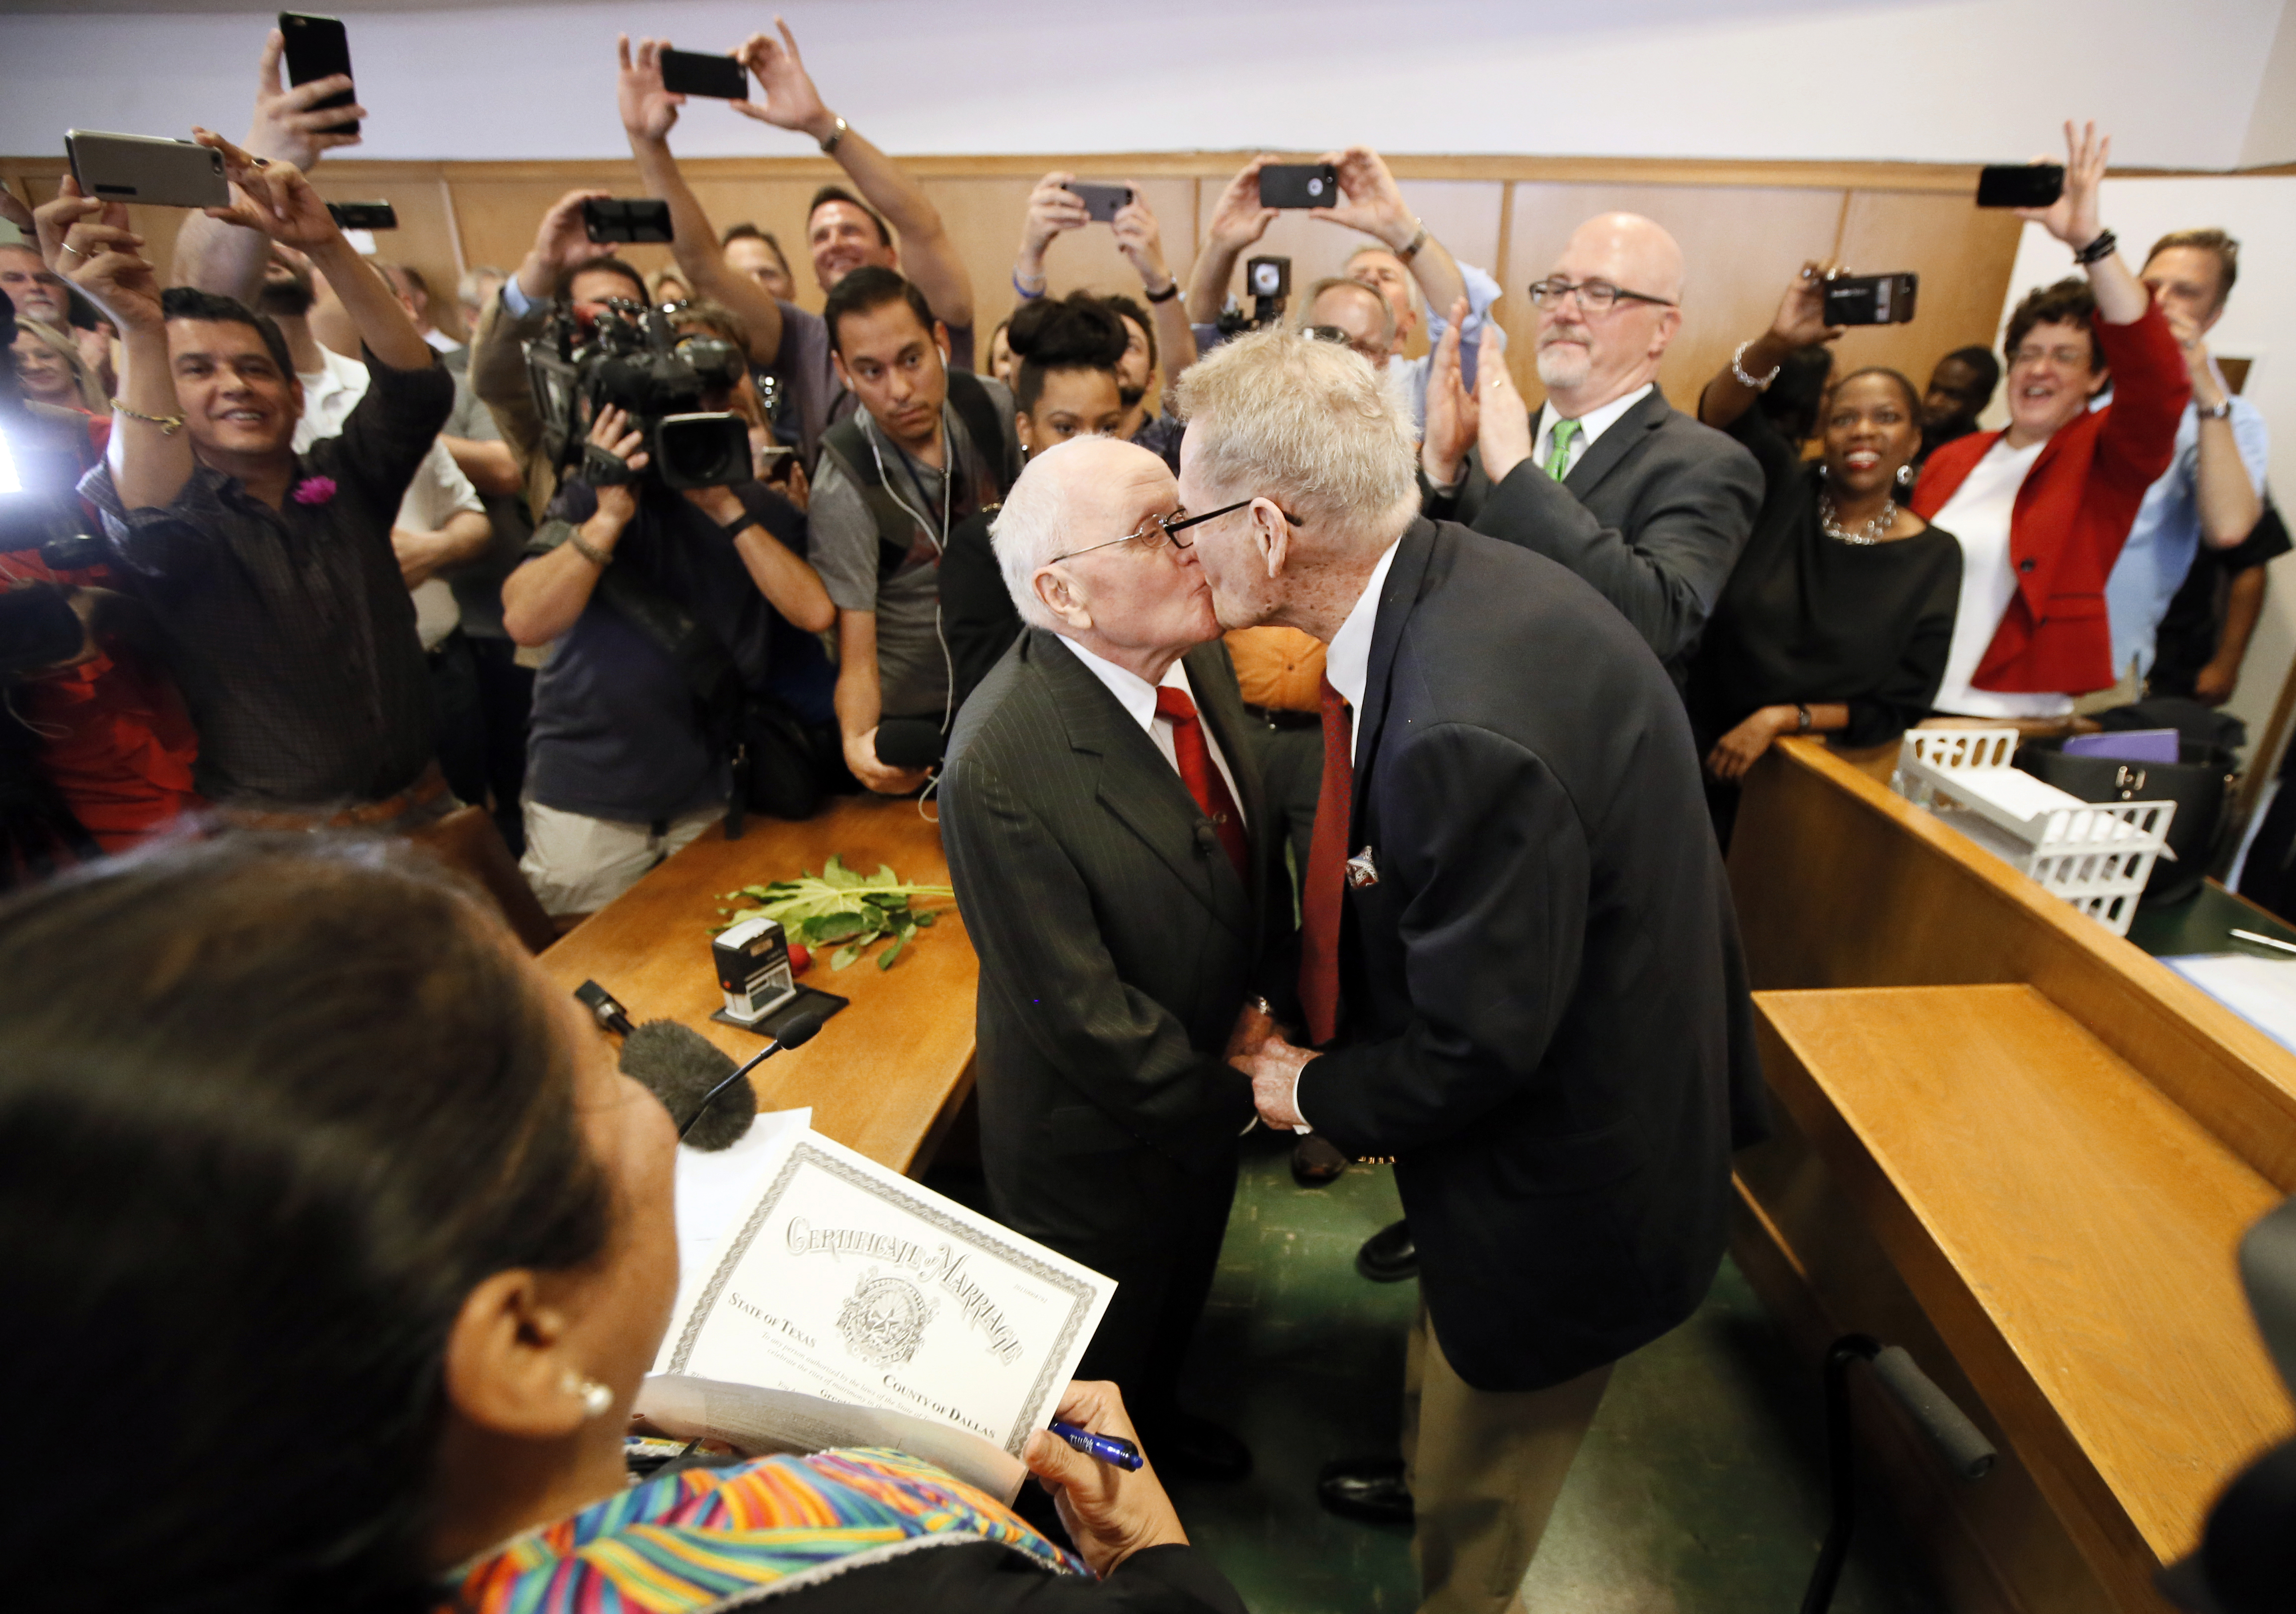 Judge Dennise Garcia, left front, watches as George Harris, center left, 82, and Jack Evans, center right, 85, kiss after being married by Judge Garcia Friday, June 26, 2015, in Dallas. Gay and lesbian Americans have the same right to marry as any other couples, the Supreme Court declared Friday in a historic ruling deciding one of the nation's most contentious and emotional legal questions. Celebrations and joyful weddings quickly followed in states where they had been forbidden. (AP Photo/Tony Gutierrez)